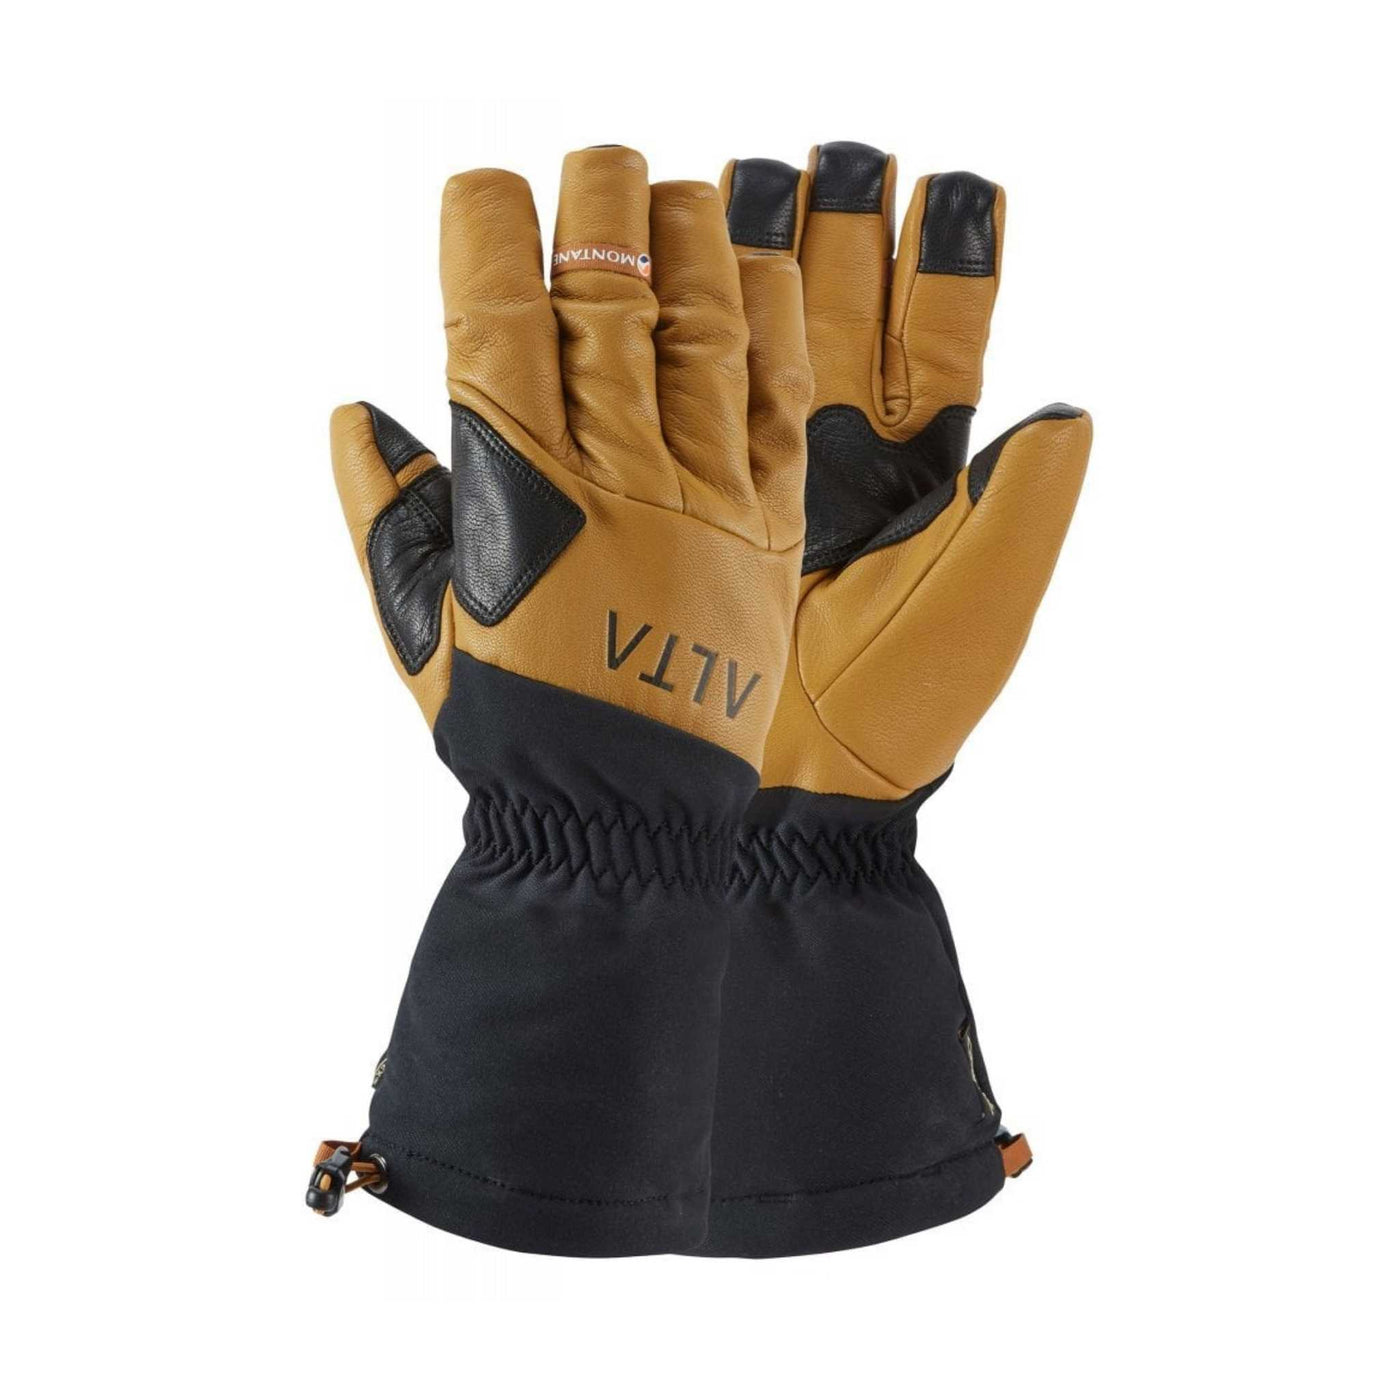 Montane Alpine Mission Glove | Technical and Warm Mountaineering Glove | Further Faster Christchurch NZ #black